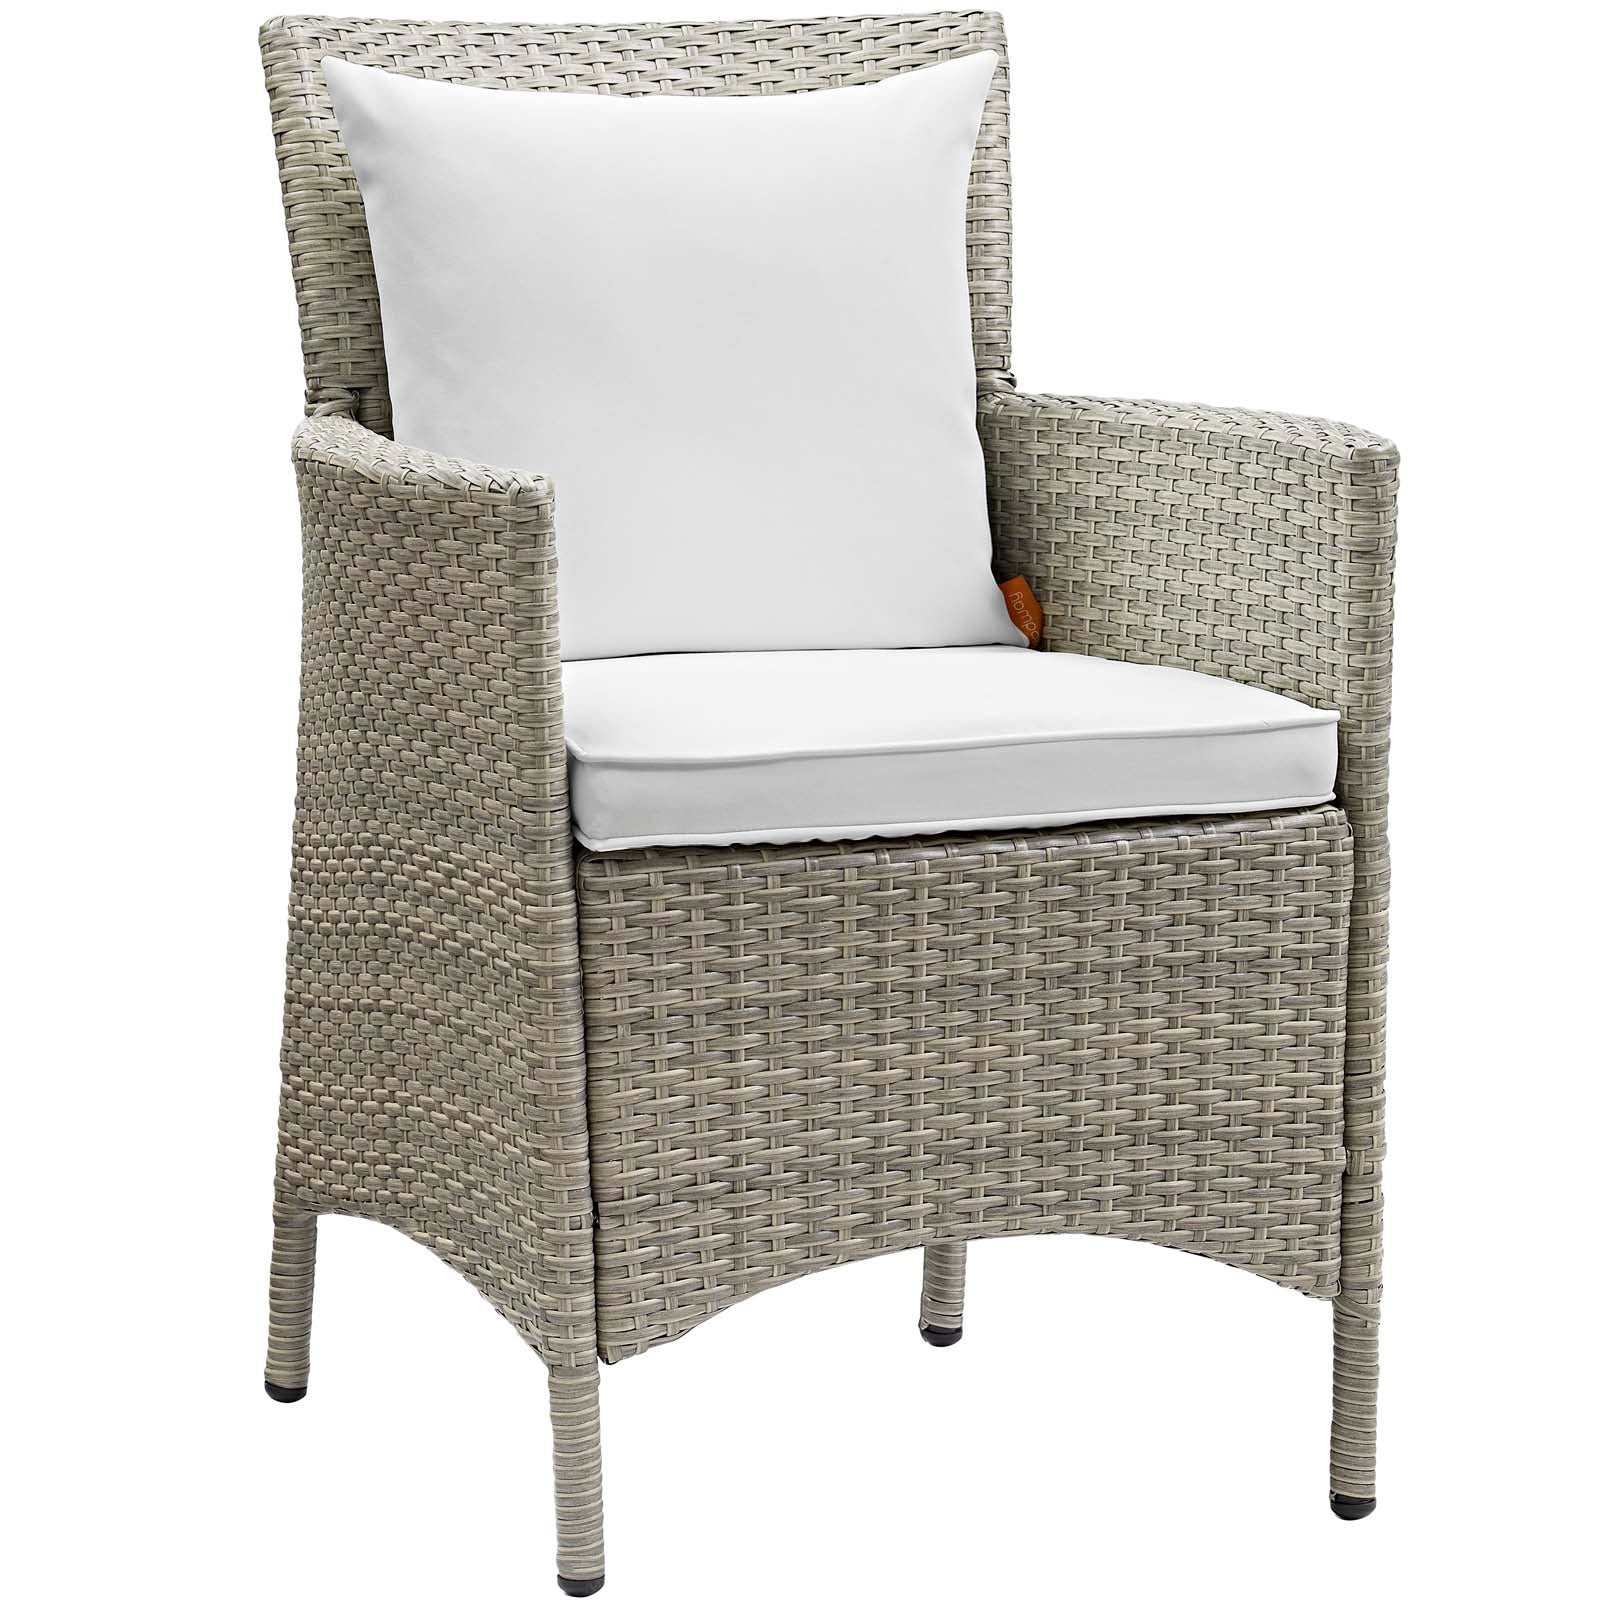 Modway Outdoor Dining Chairs - Conduit Outdoor Patio Wicker Rattan Dining Armchair Light Gray White